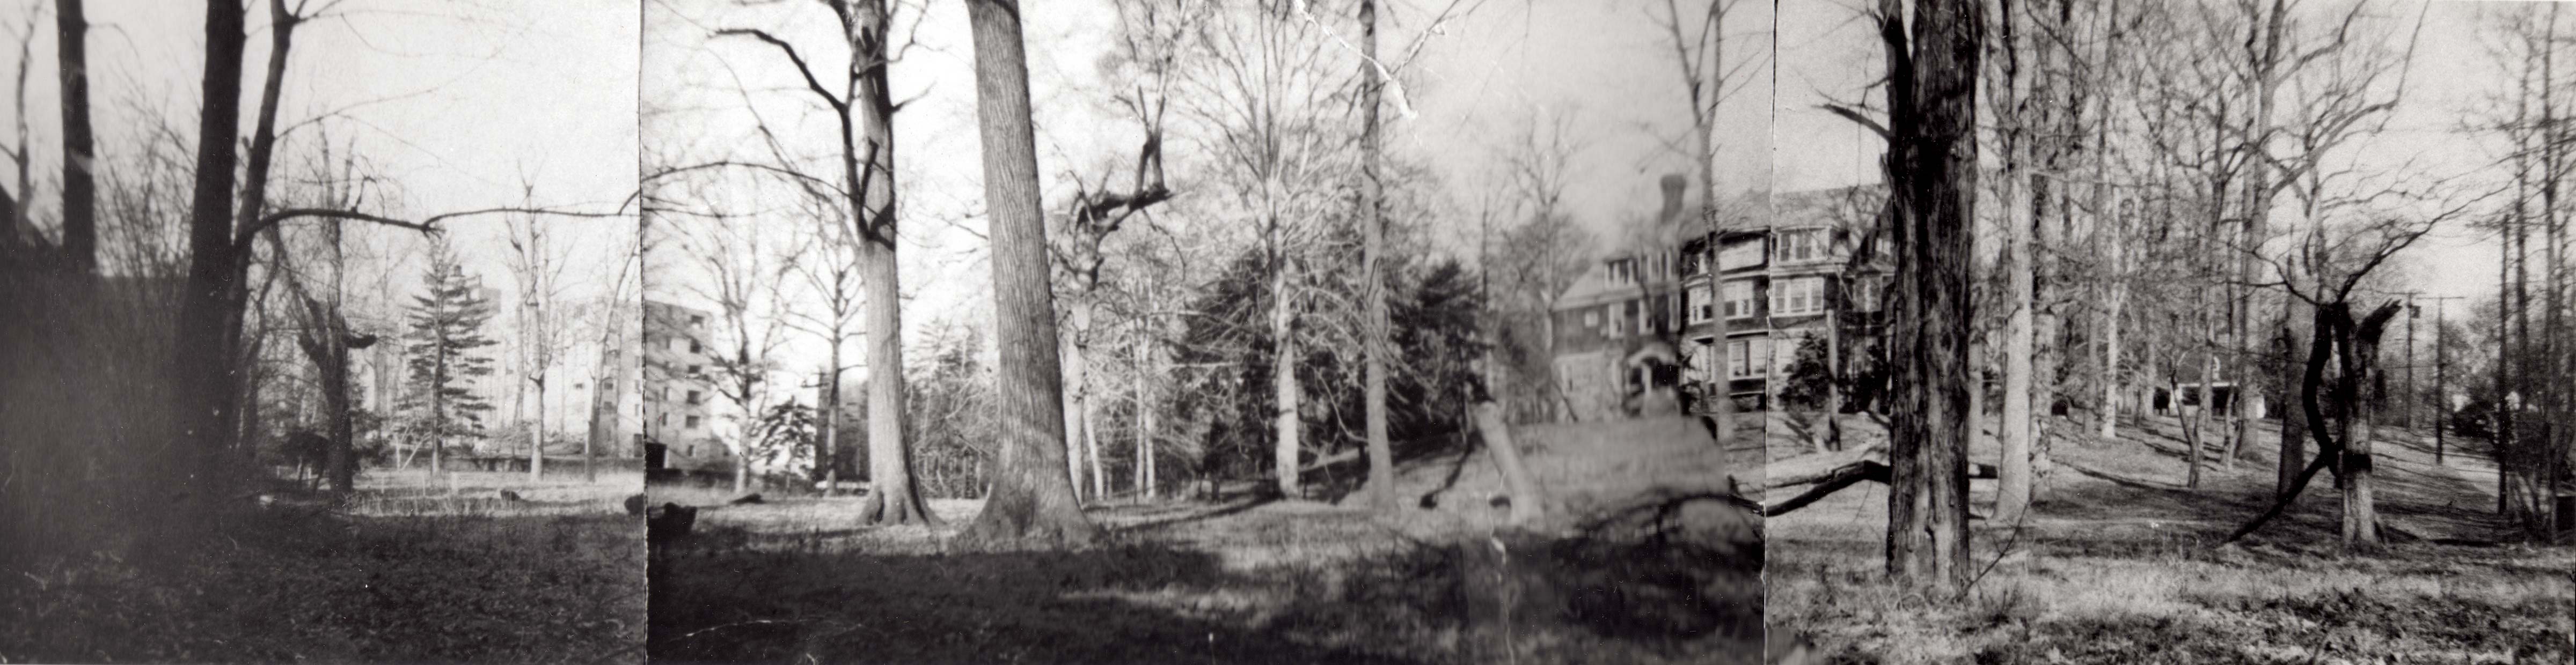 wide view of a lot with tall trees on rising ground, large house on the hilltop.